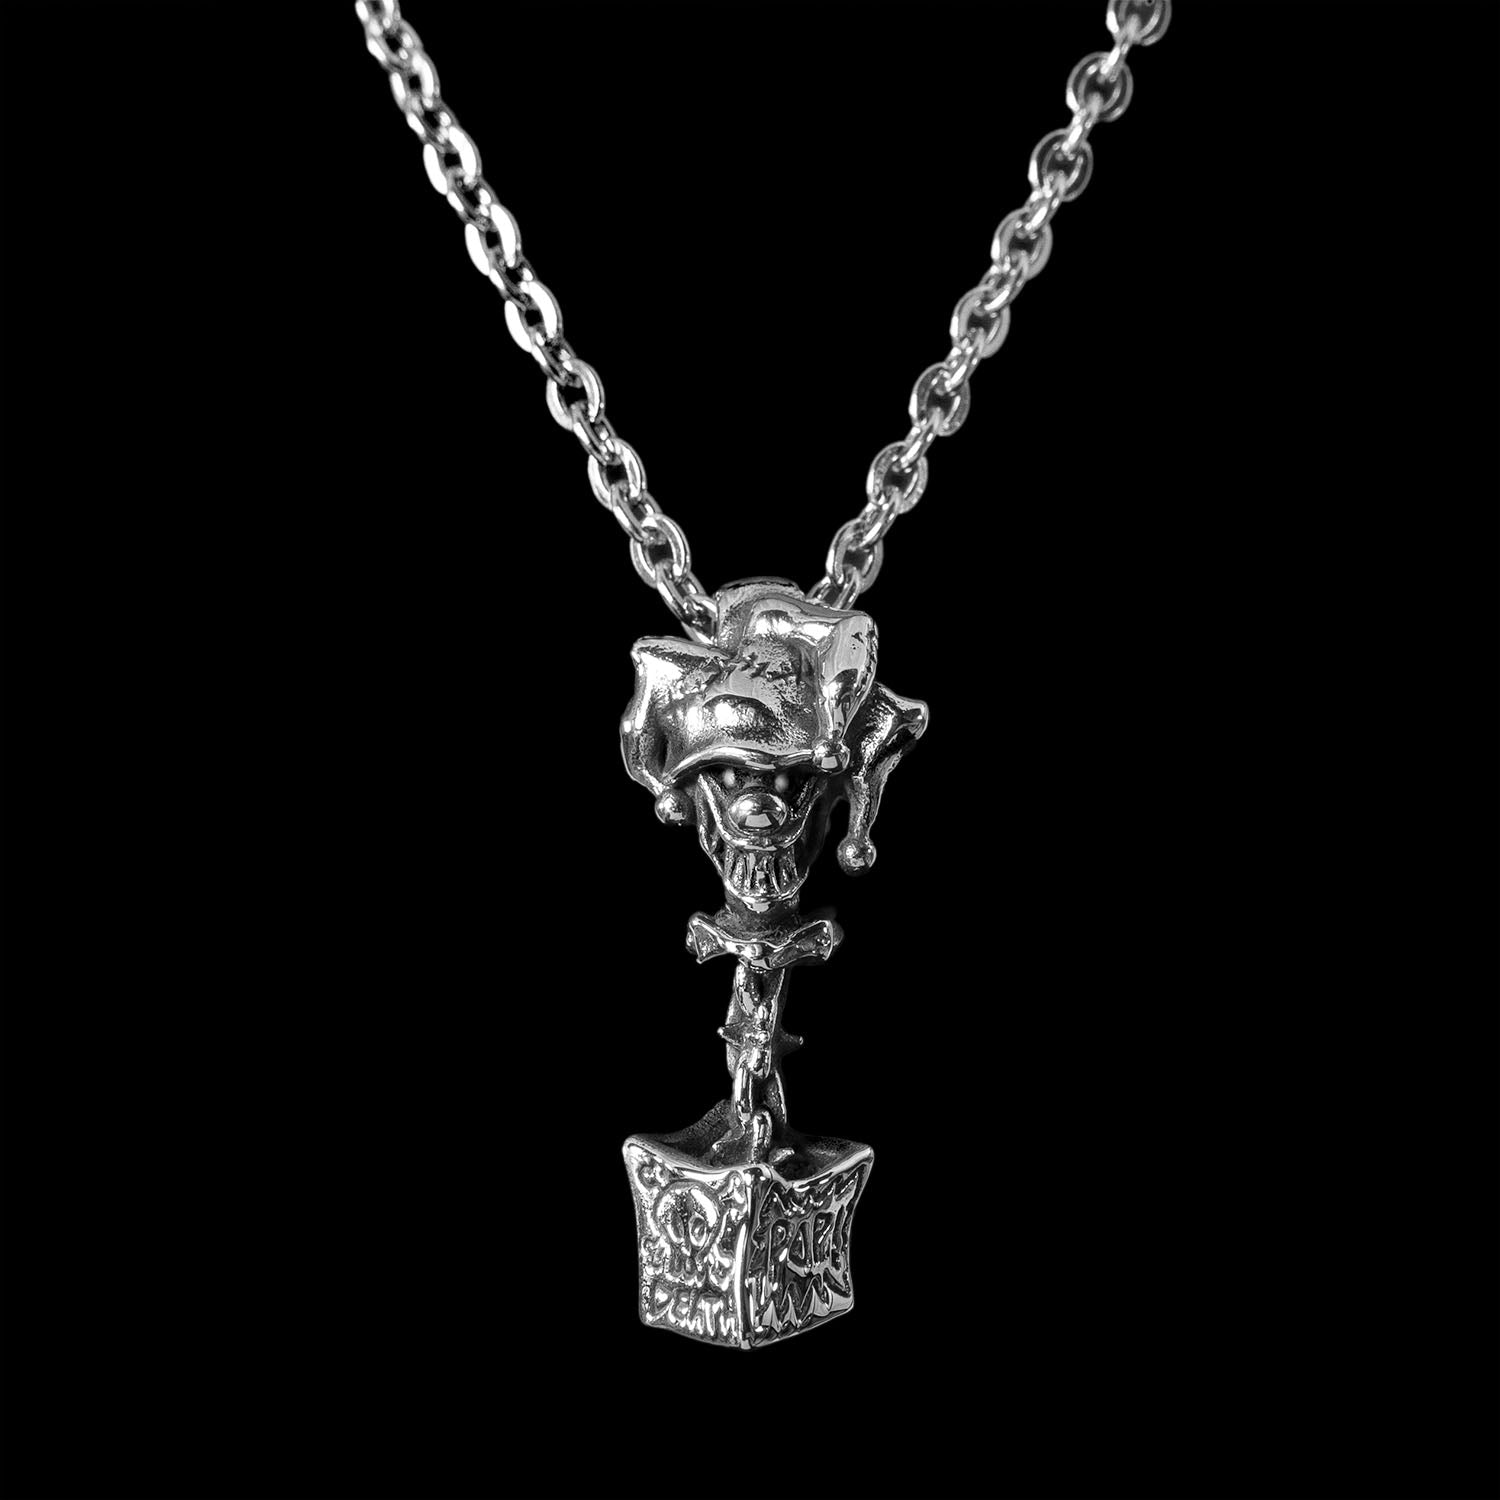 Jack In The Box Pendant - Stainless Steel